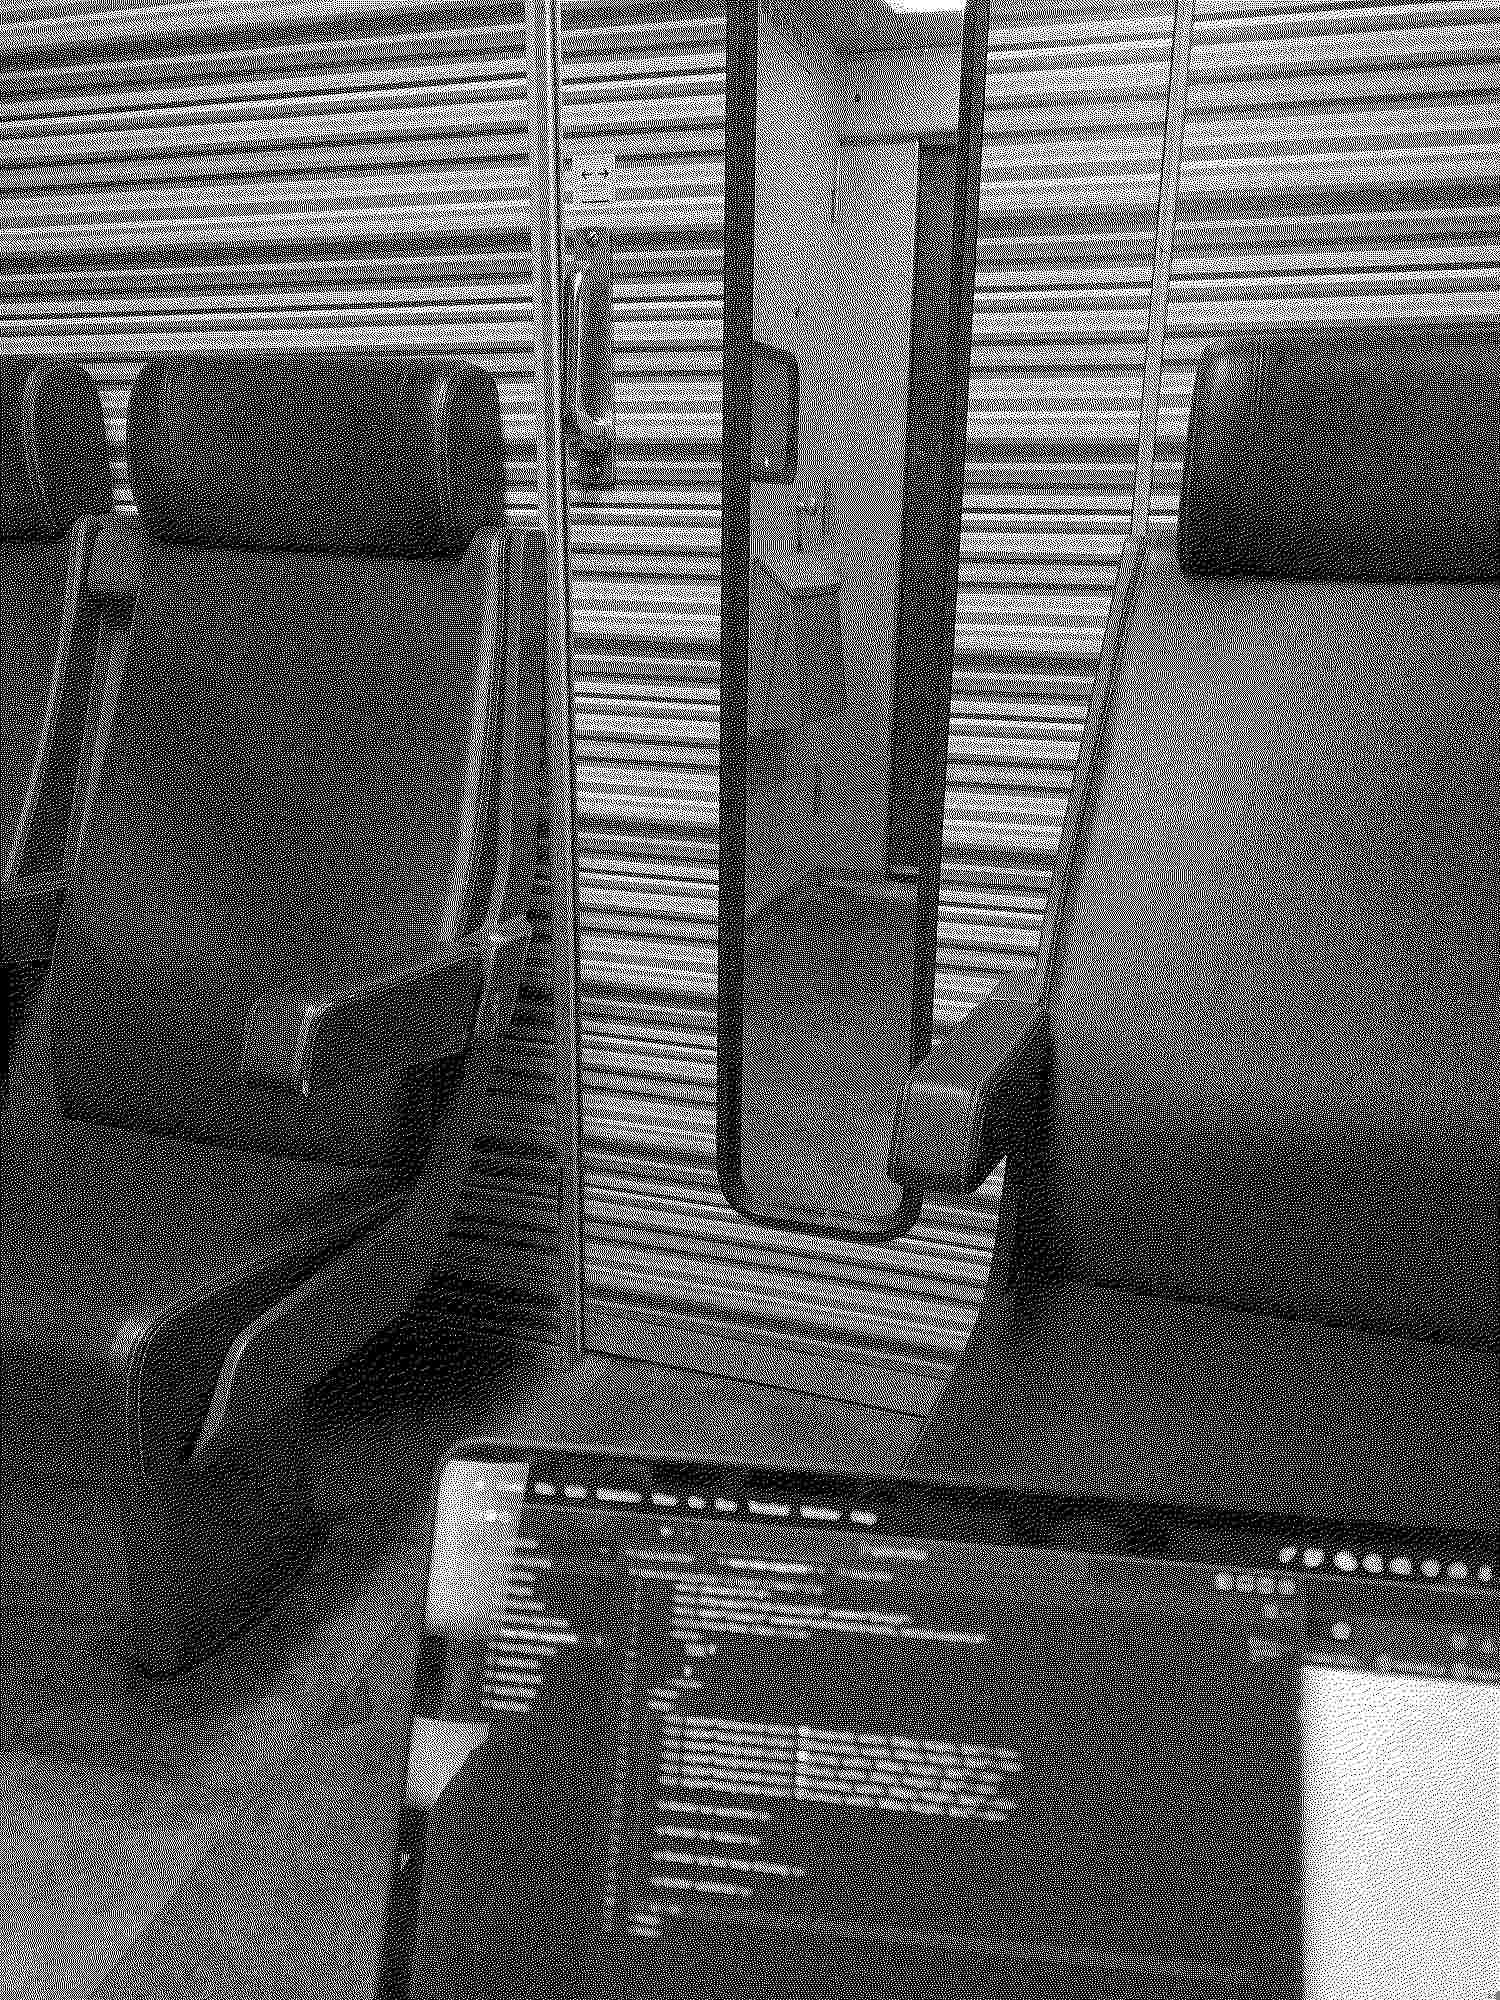 laptoping on an NS train